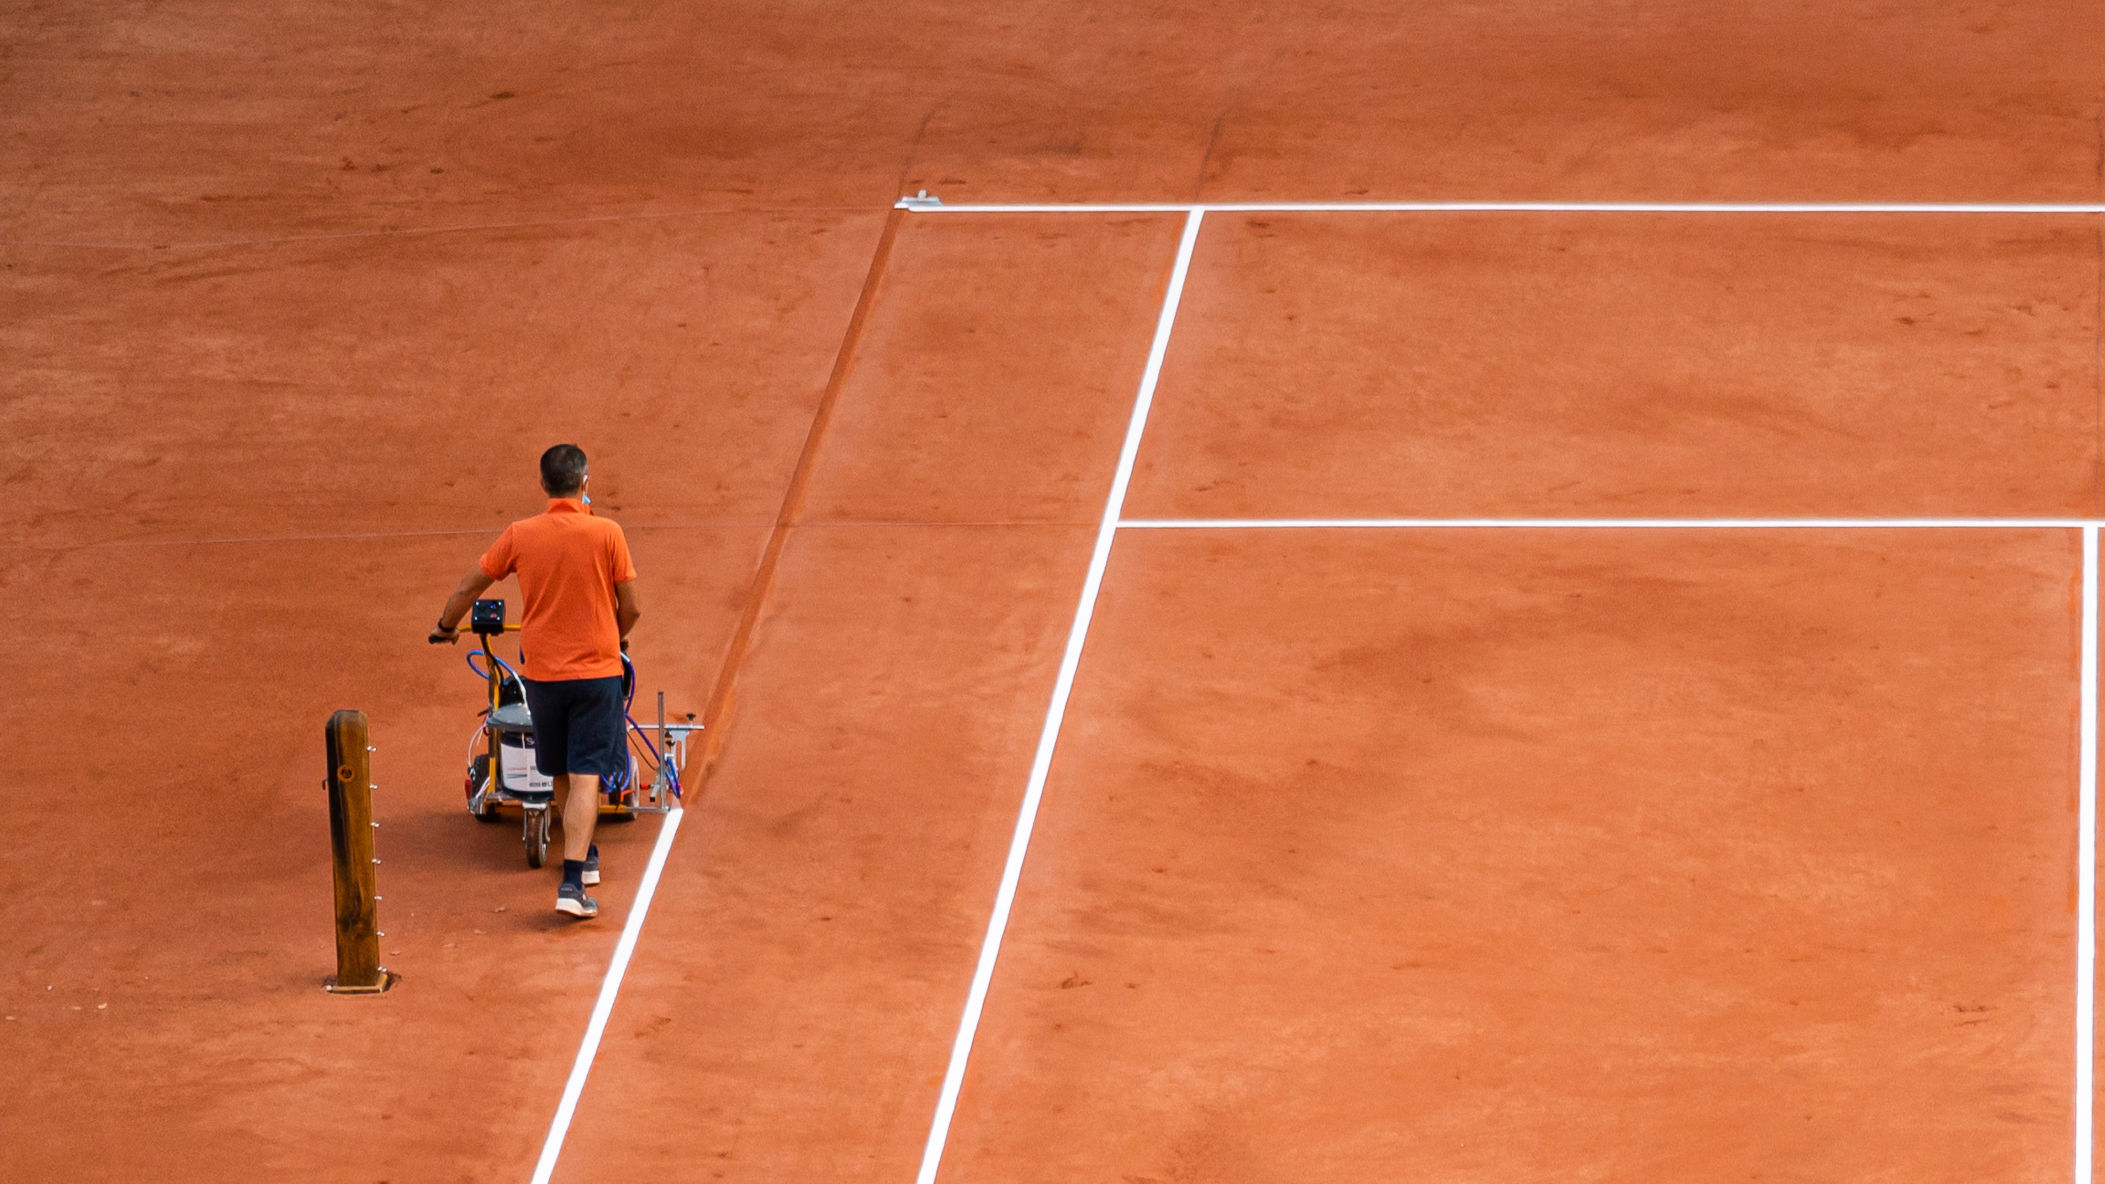 French Open to allow 1,000 fans a day, tournament chief Guy Forget calls move ‘tough blow’